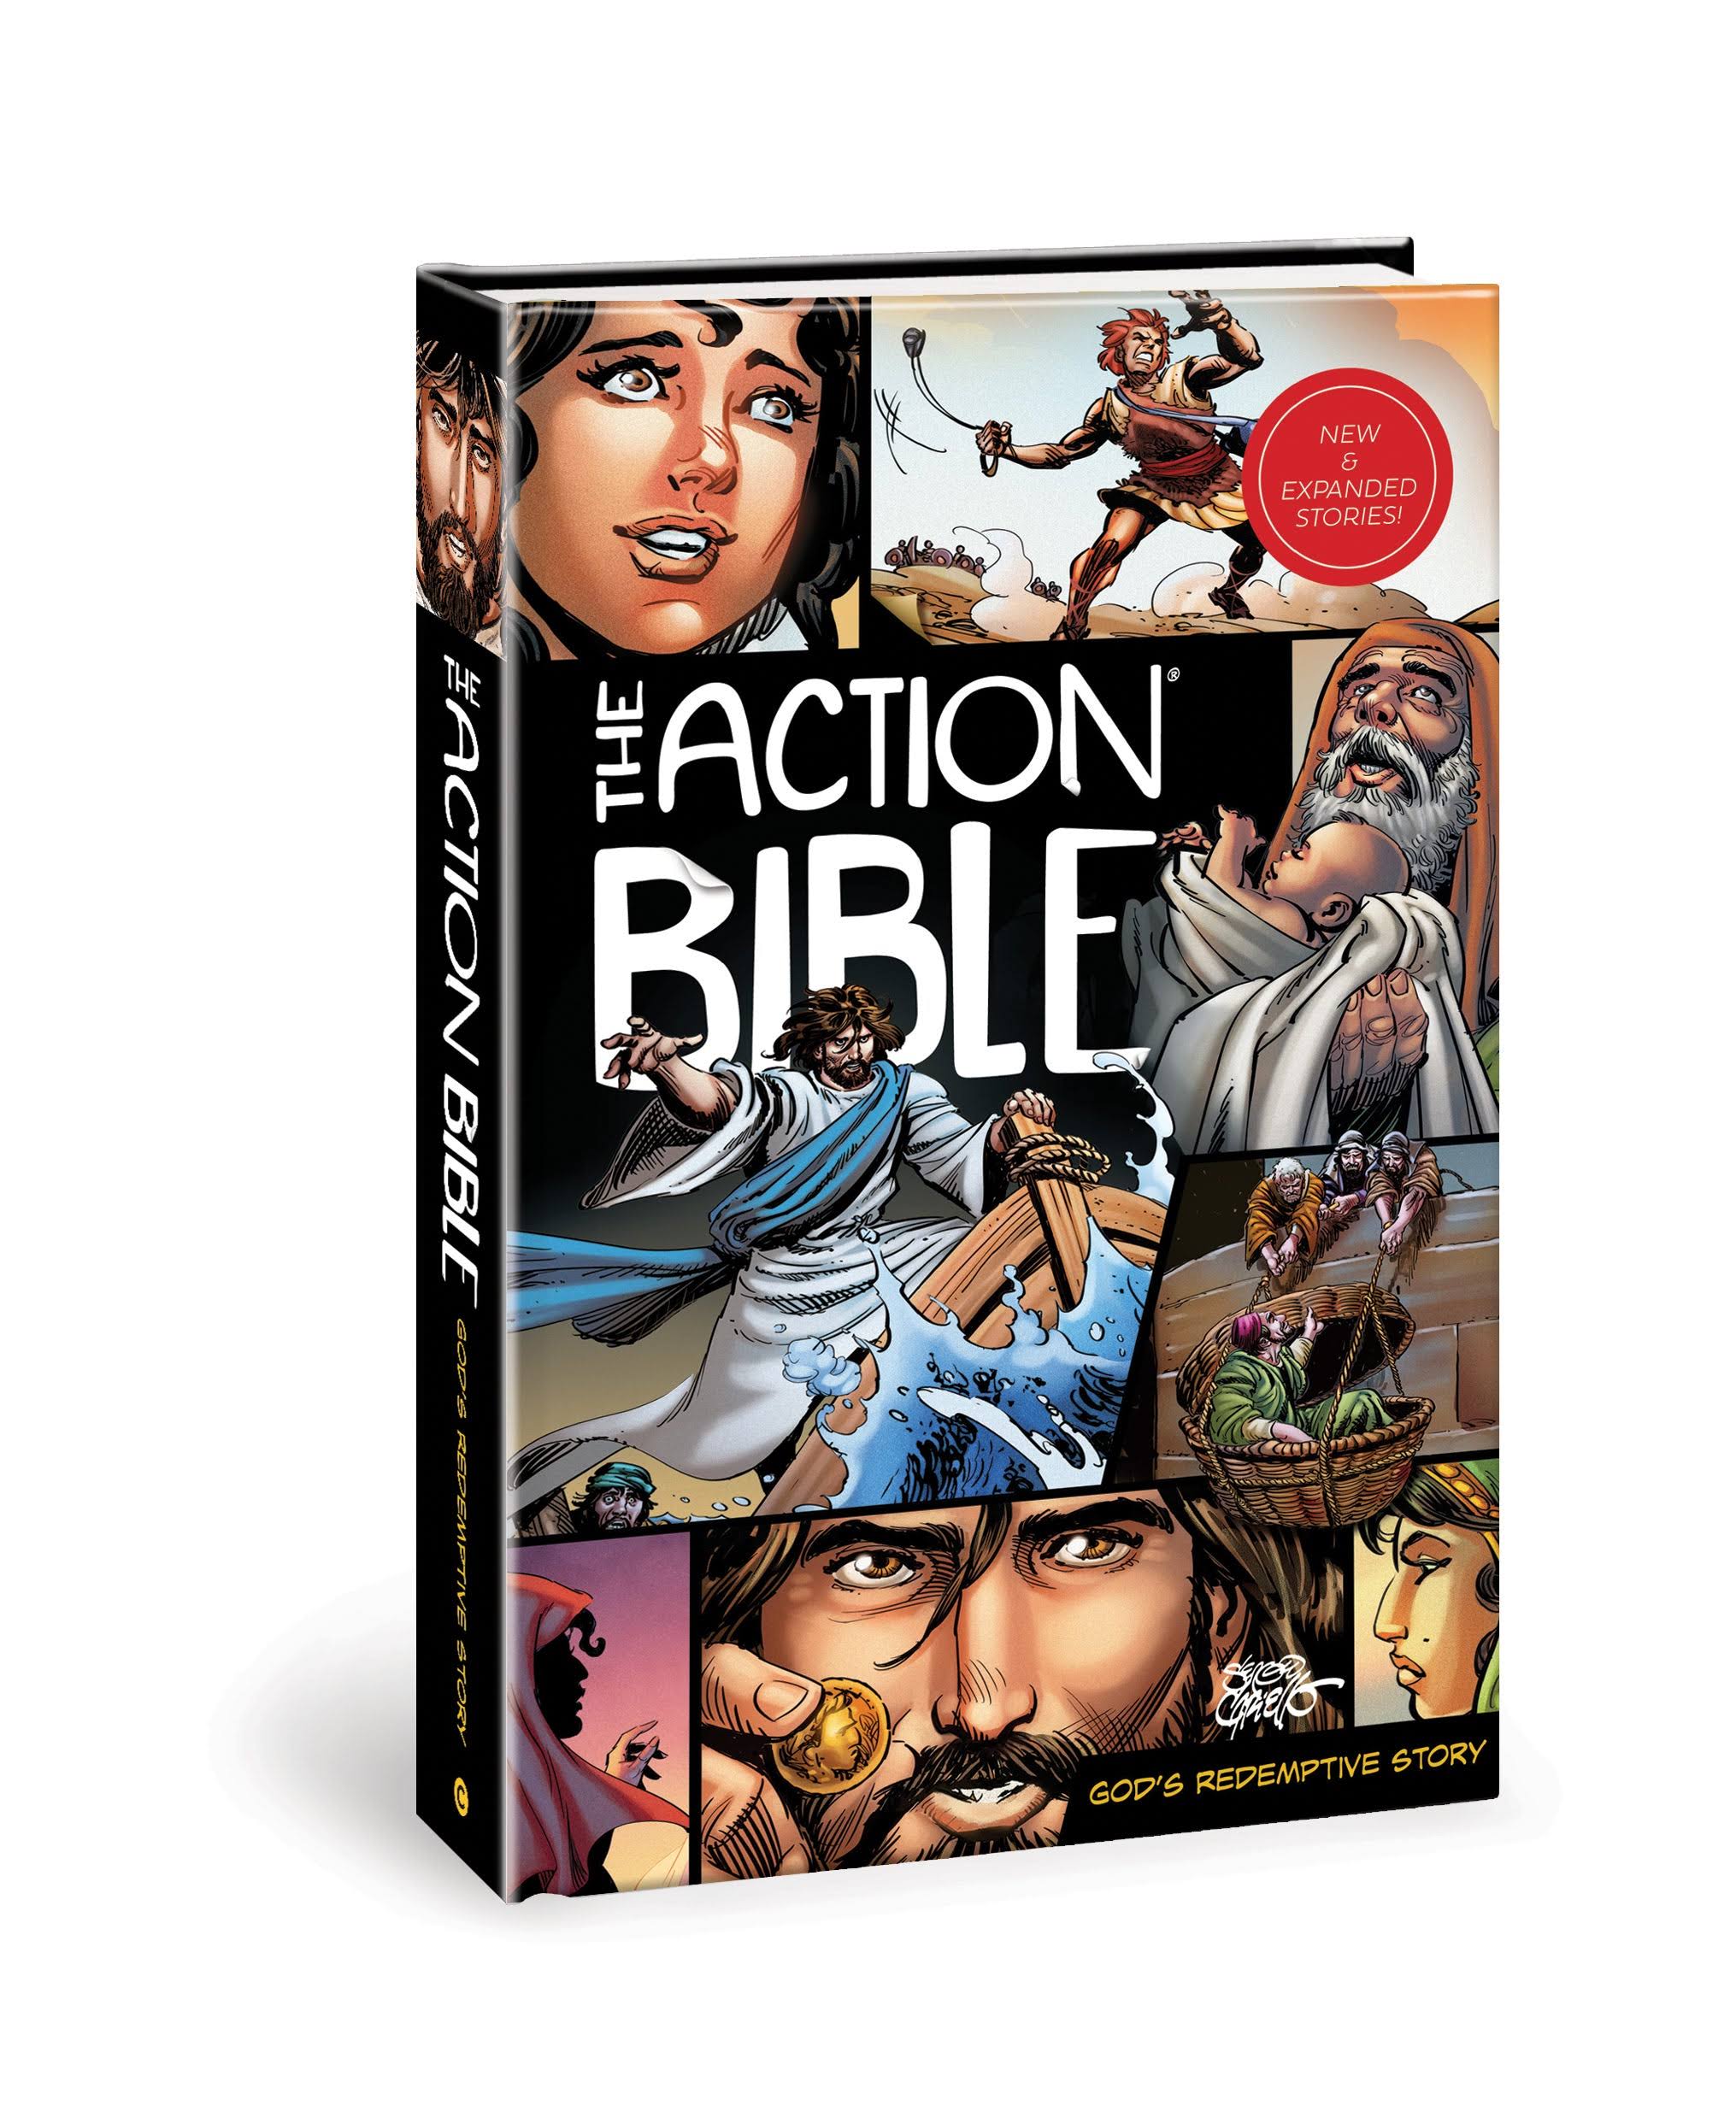 The Action Bible: God's Redemptive Story, Sergio Cariello